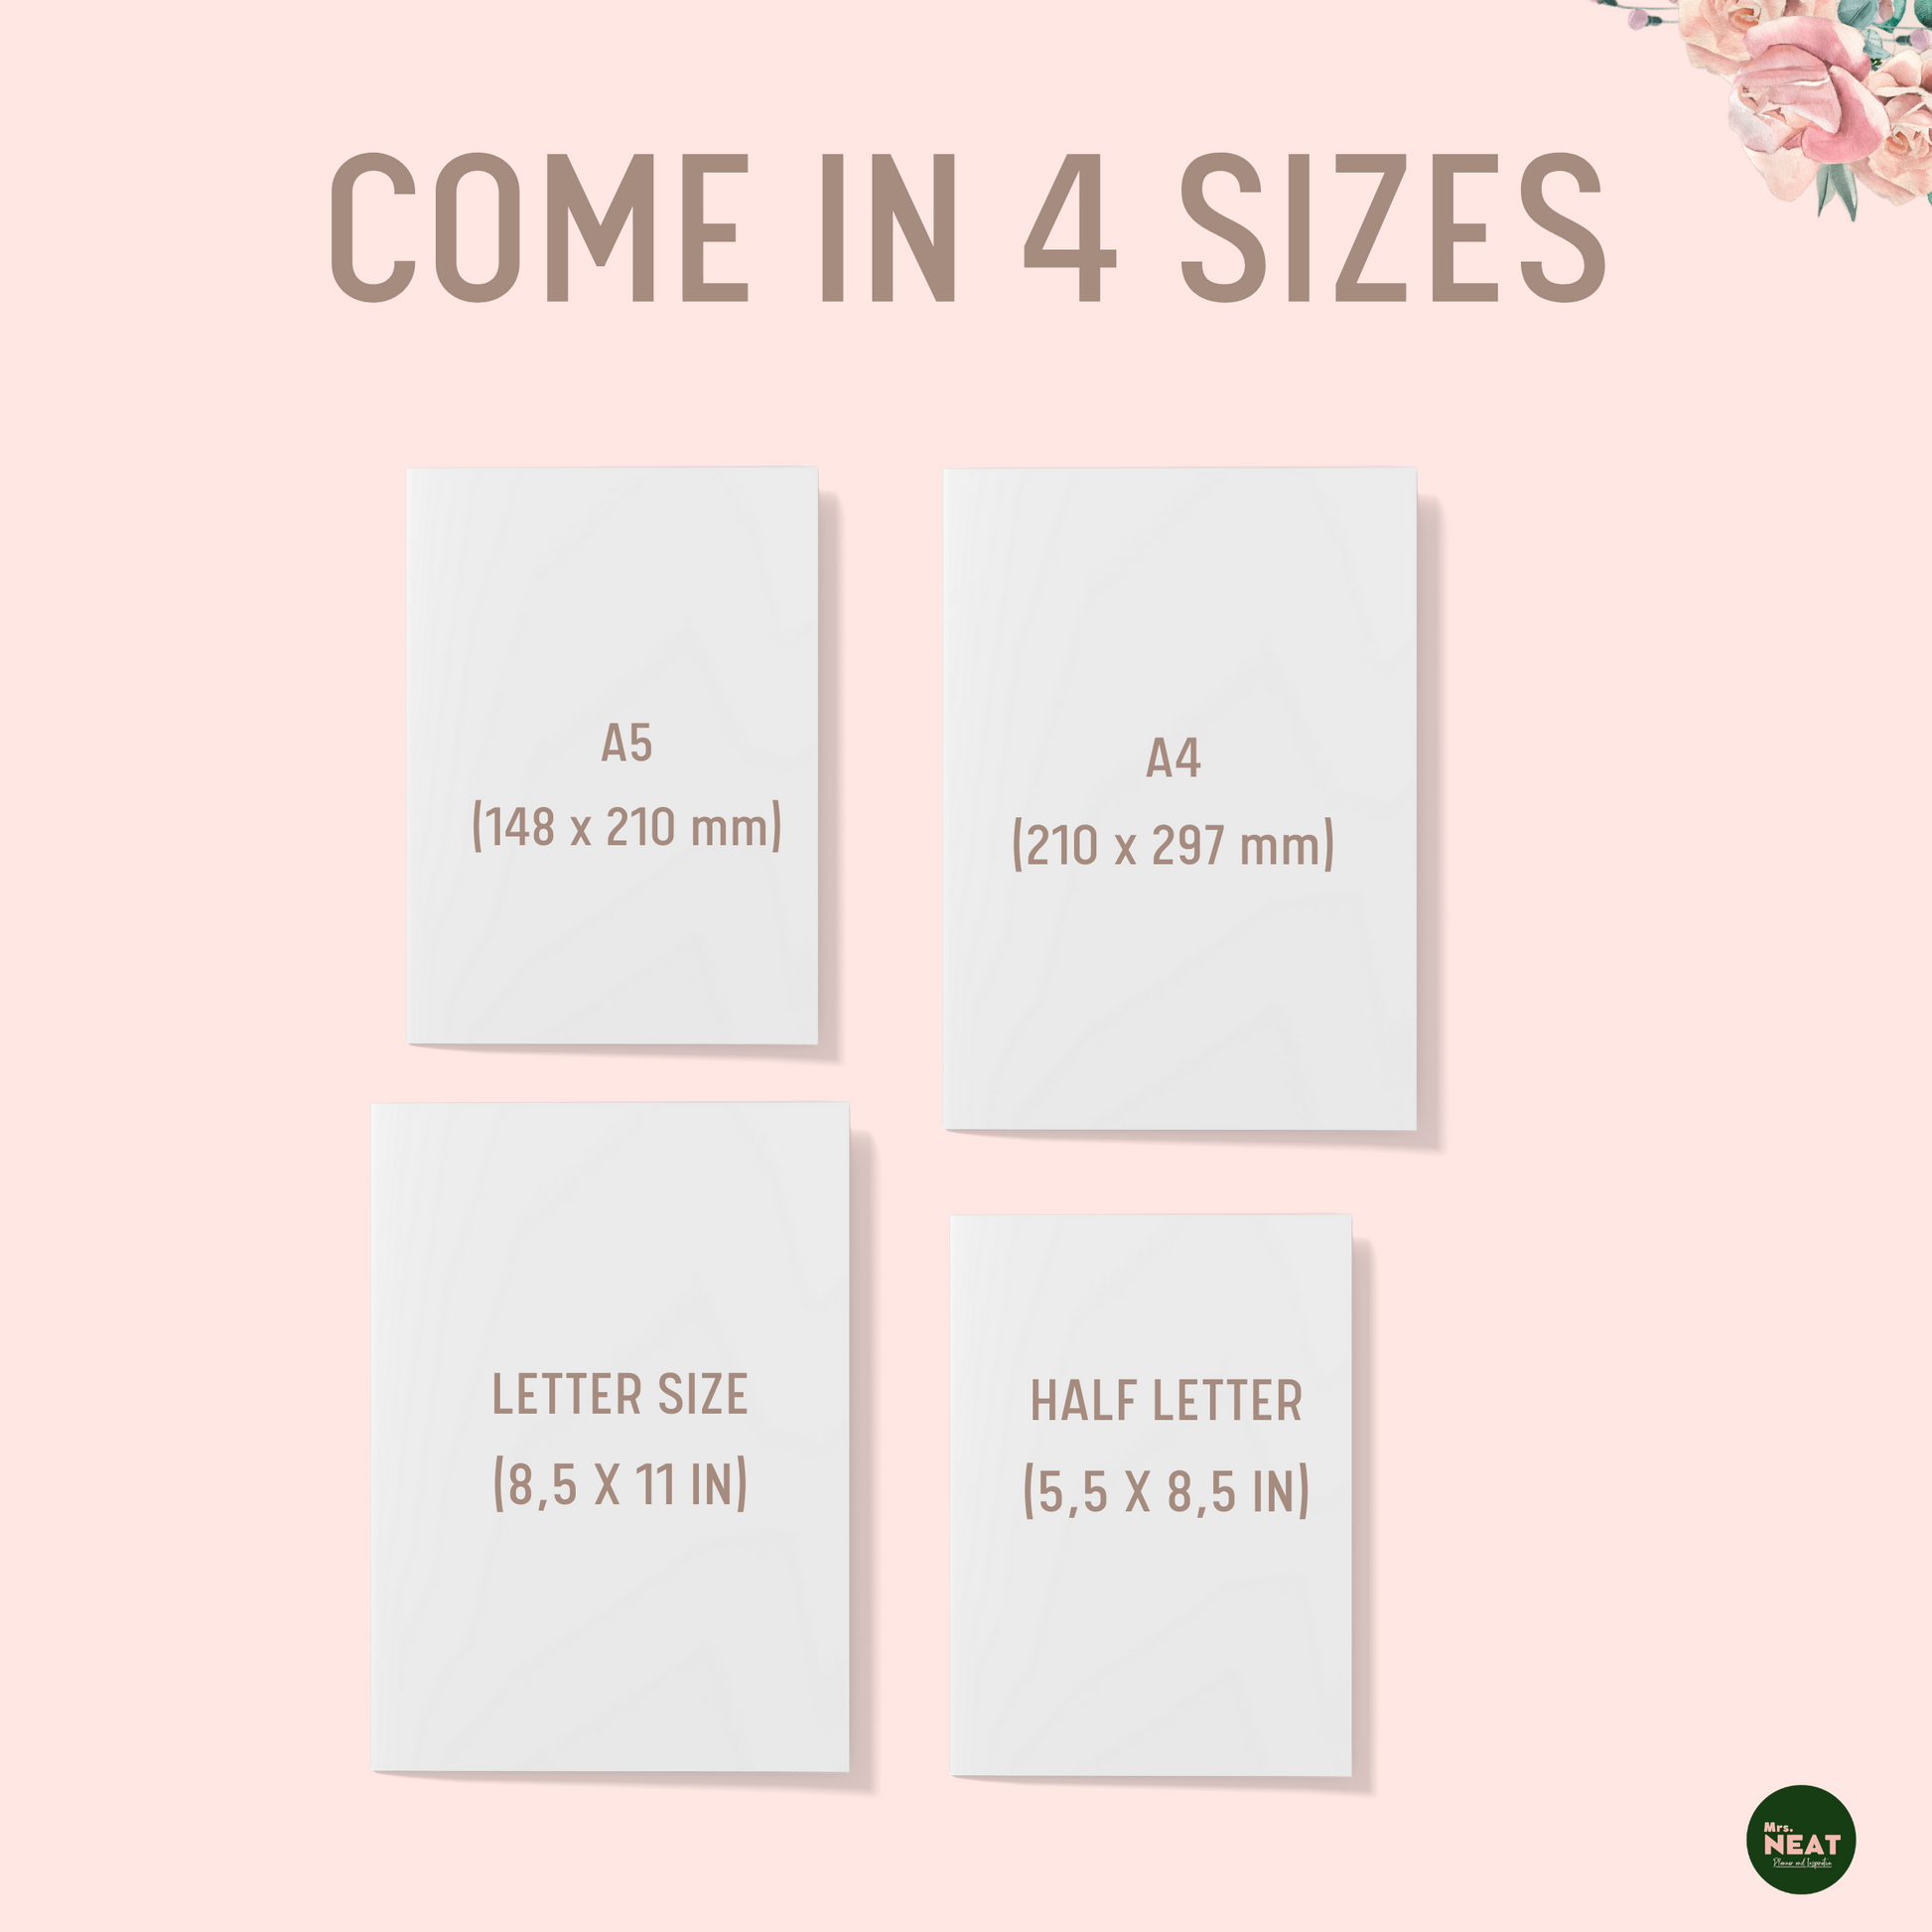 Floral Weekly Planner come in A4, A5, Letter and Half Letter size